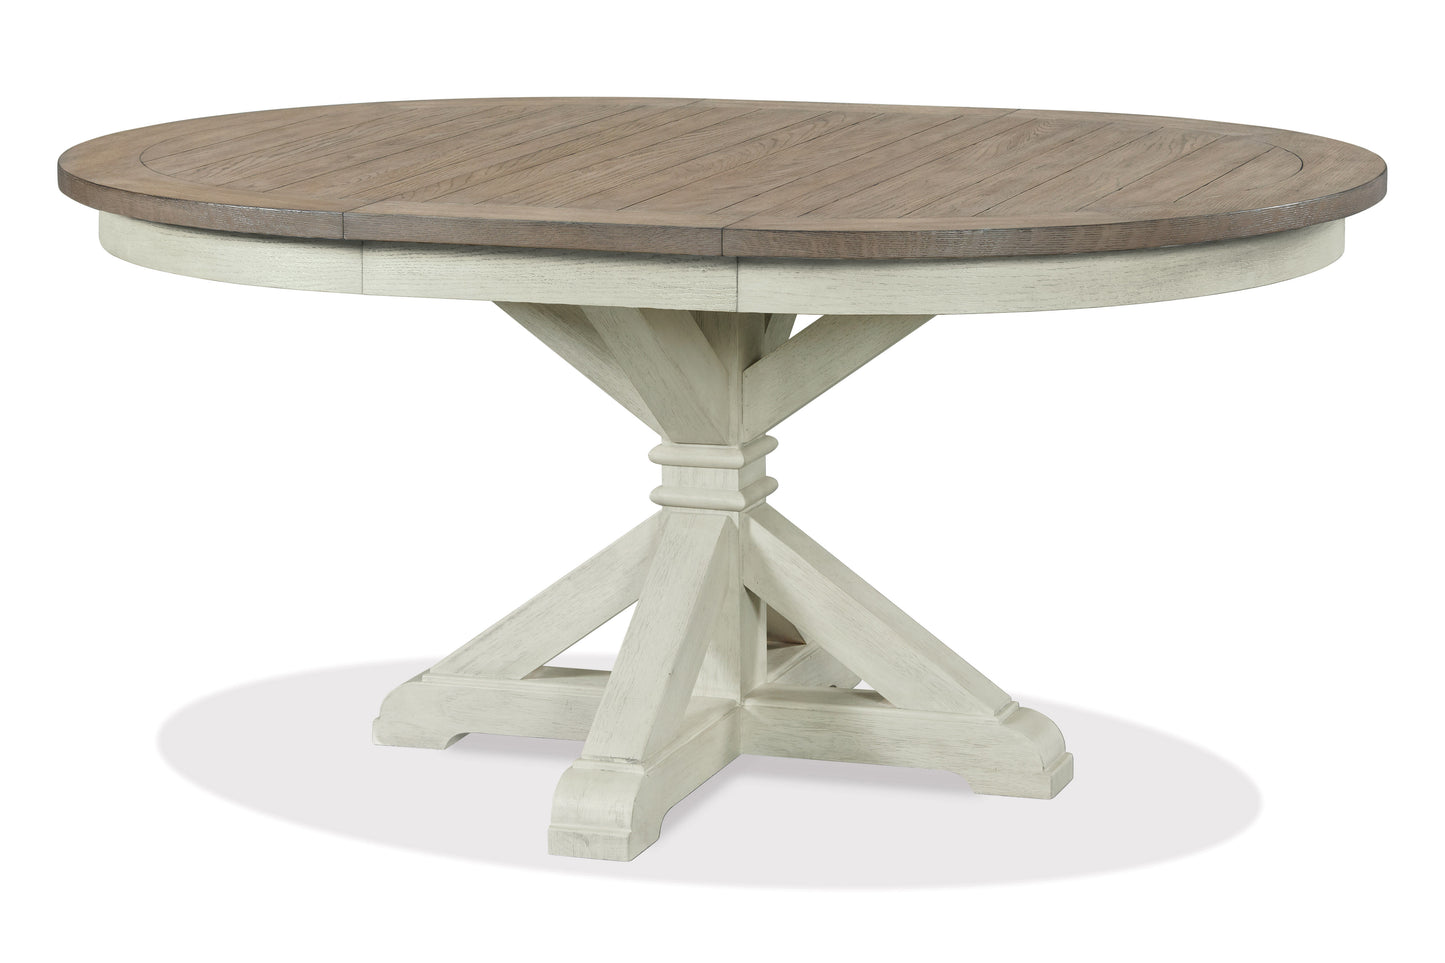 Roundhill Furniture Harola Round Pedestal Dining Table with 18" Leaf, Distressed Pine Finish